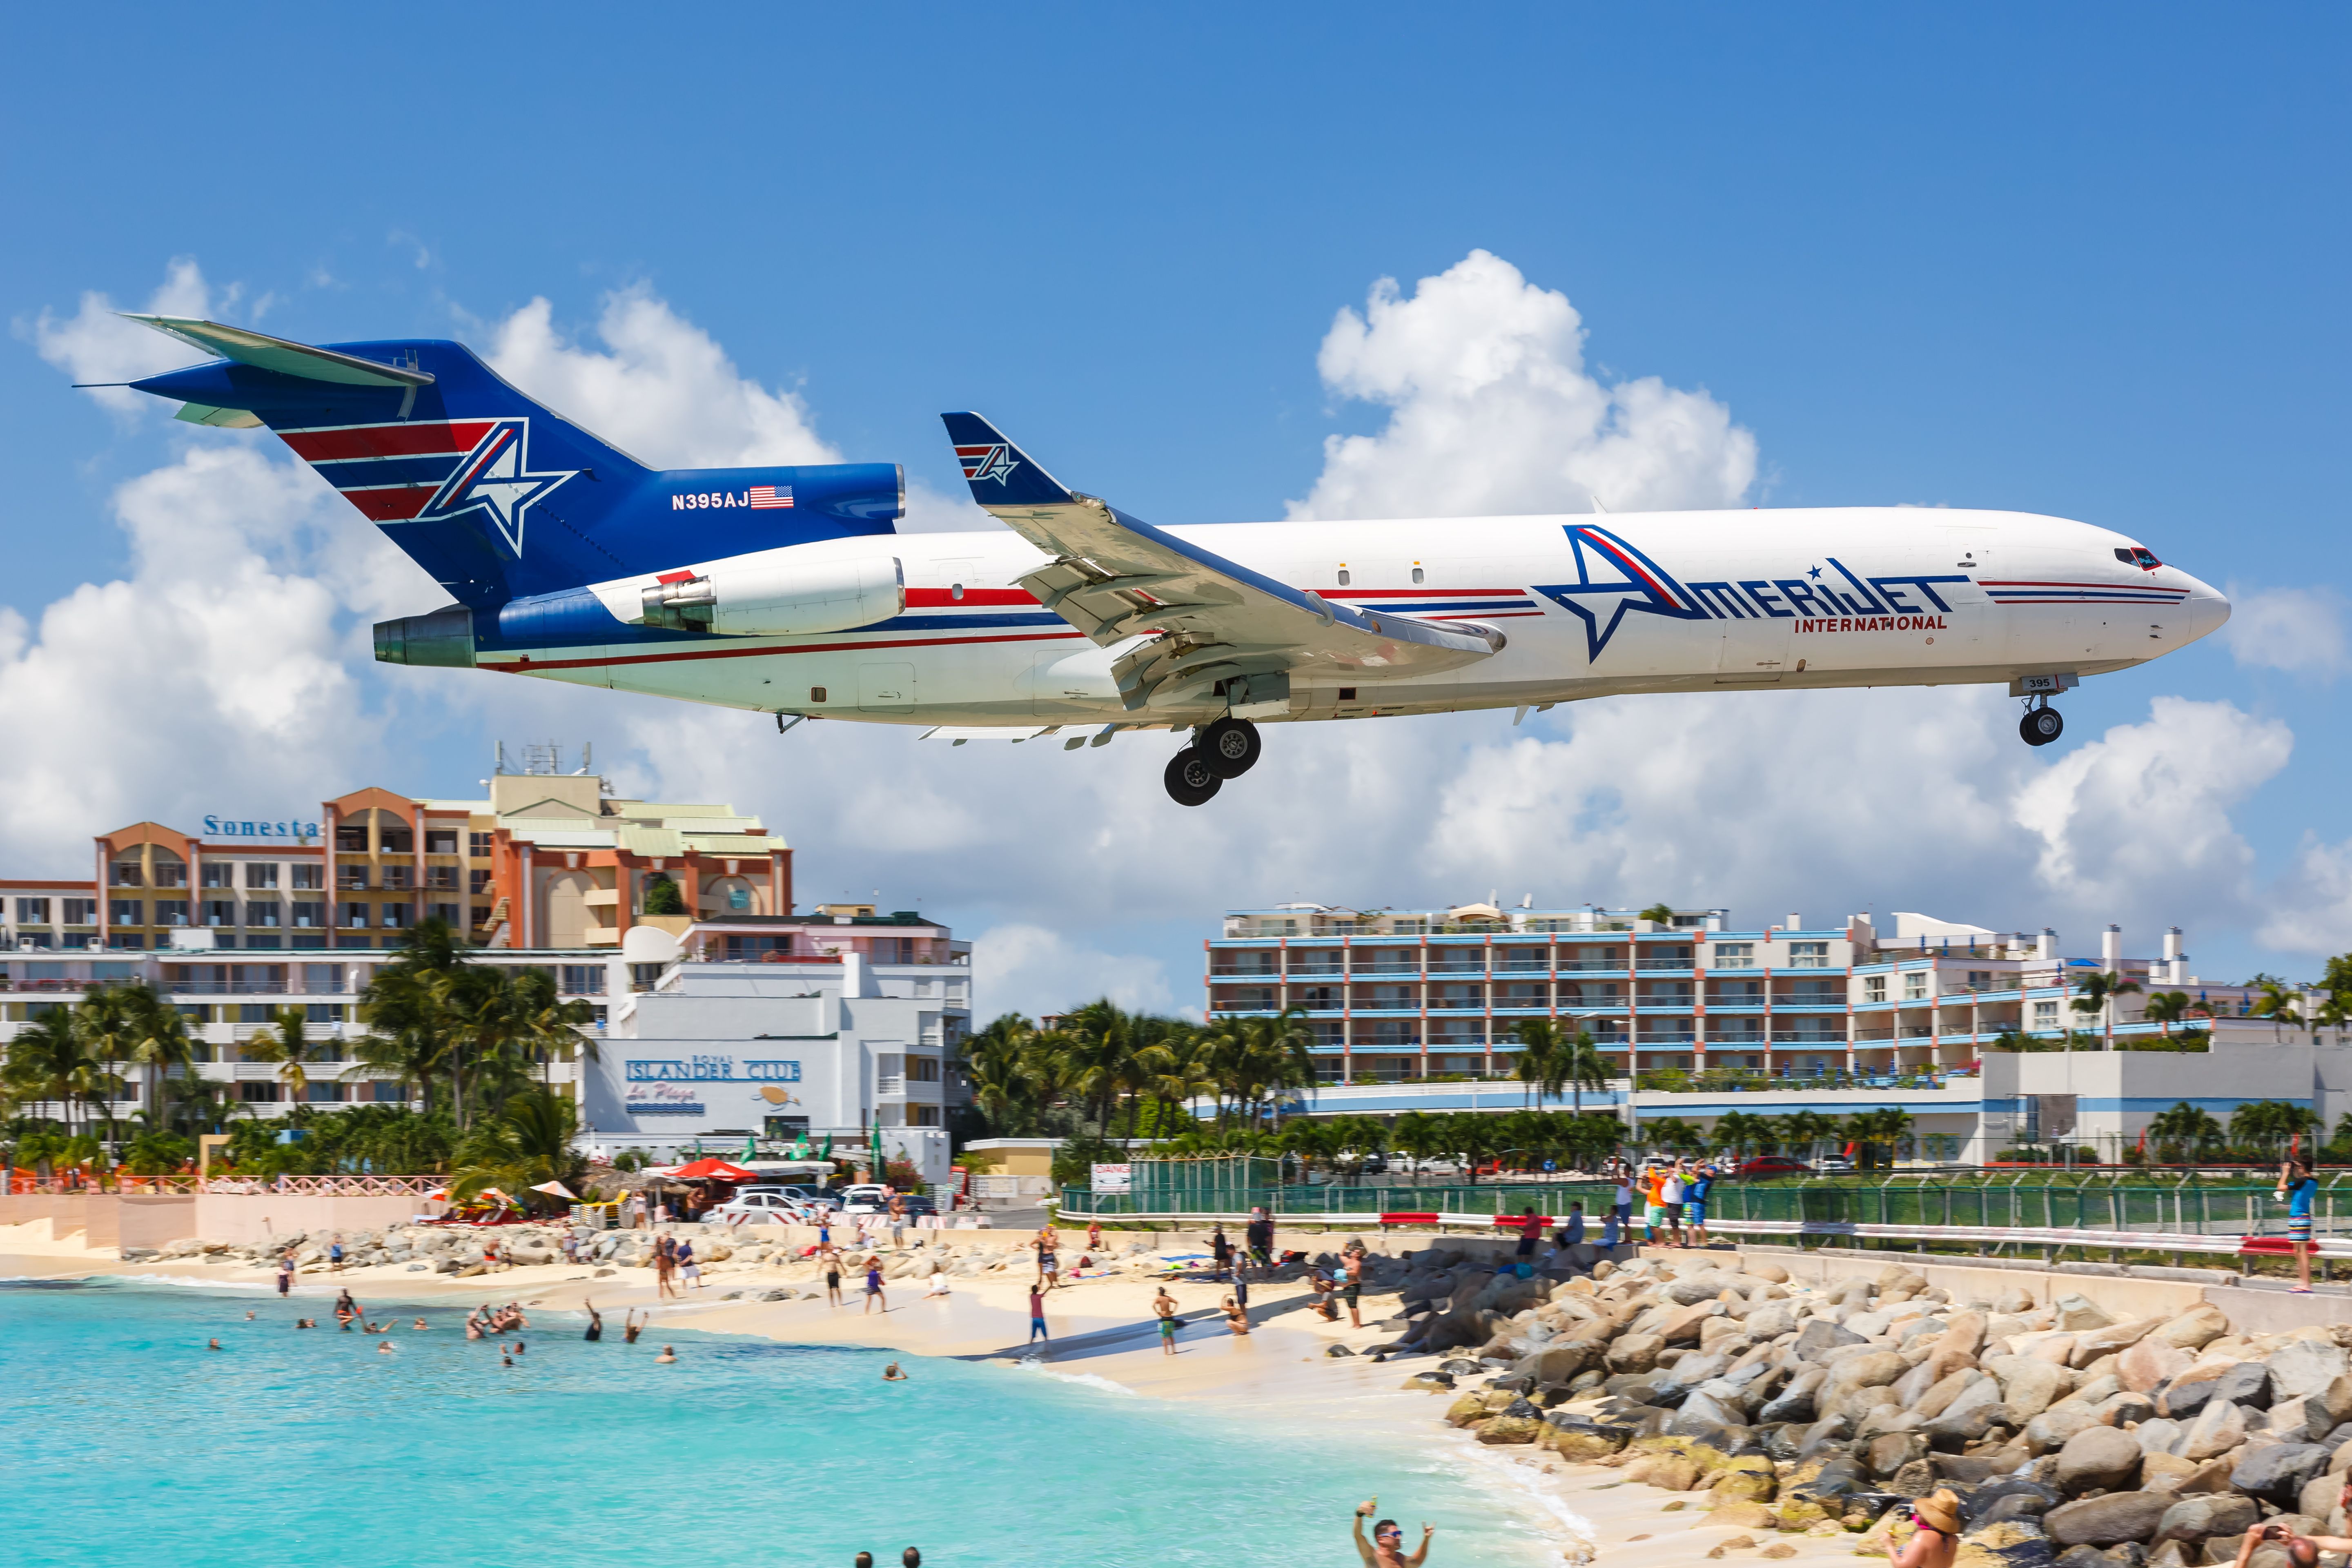 An Amerijet Boeing 727 about to land at Sint Maarten.